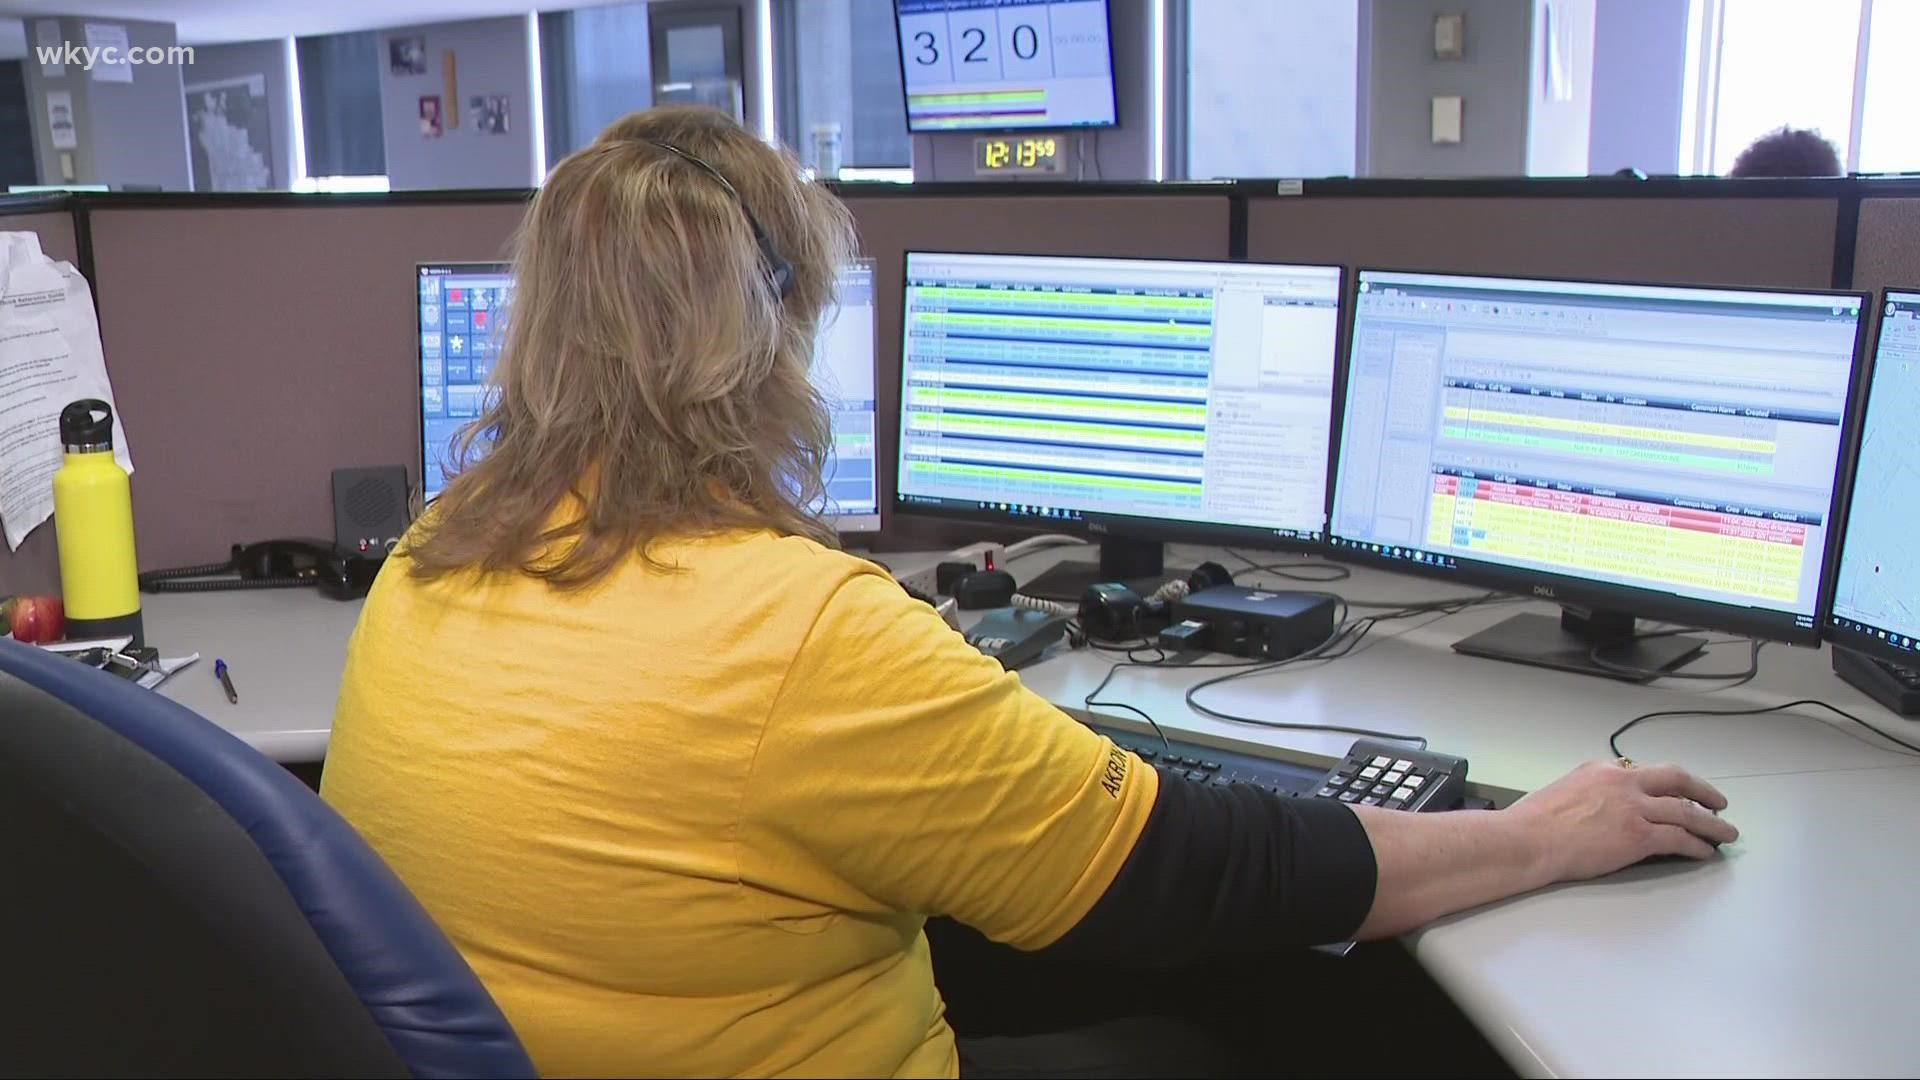 A pregnant Akron woman started feeling contractions and there wasn't enough time to get her to the hospital. A dispatcher got them through the birthing process.